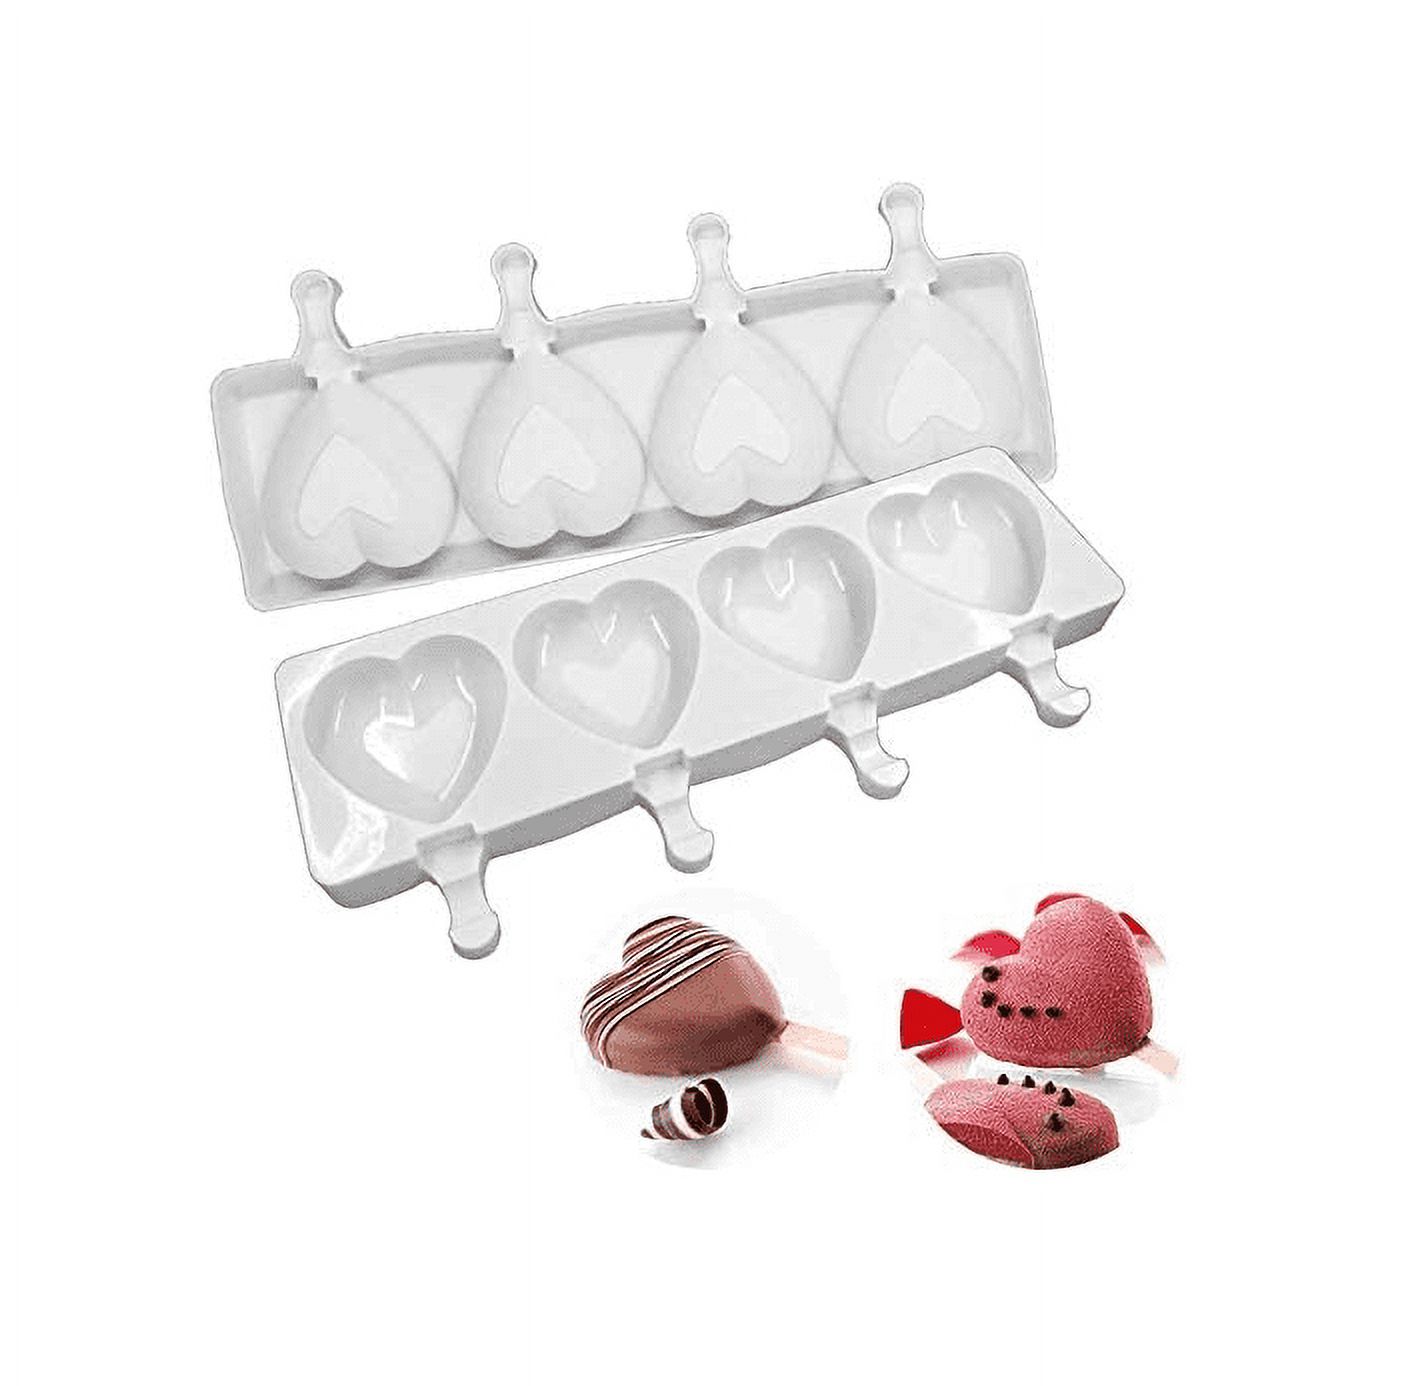 Ice Pop Molds Silicone Popsicle Molds 4 Cavities Homemade Ice Cream Mold Heart Ice Cream Mold Reusable Soft Silicone,Silicone Popsicle Molds Cake,Cakesicle Mold for DIY Ice Pops - image 1 of 7